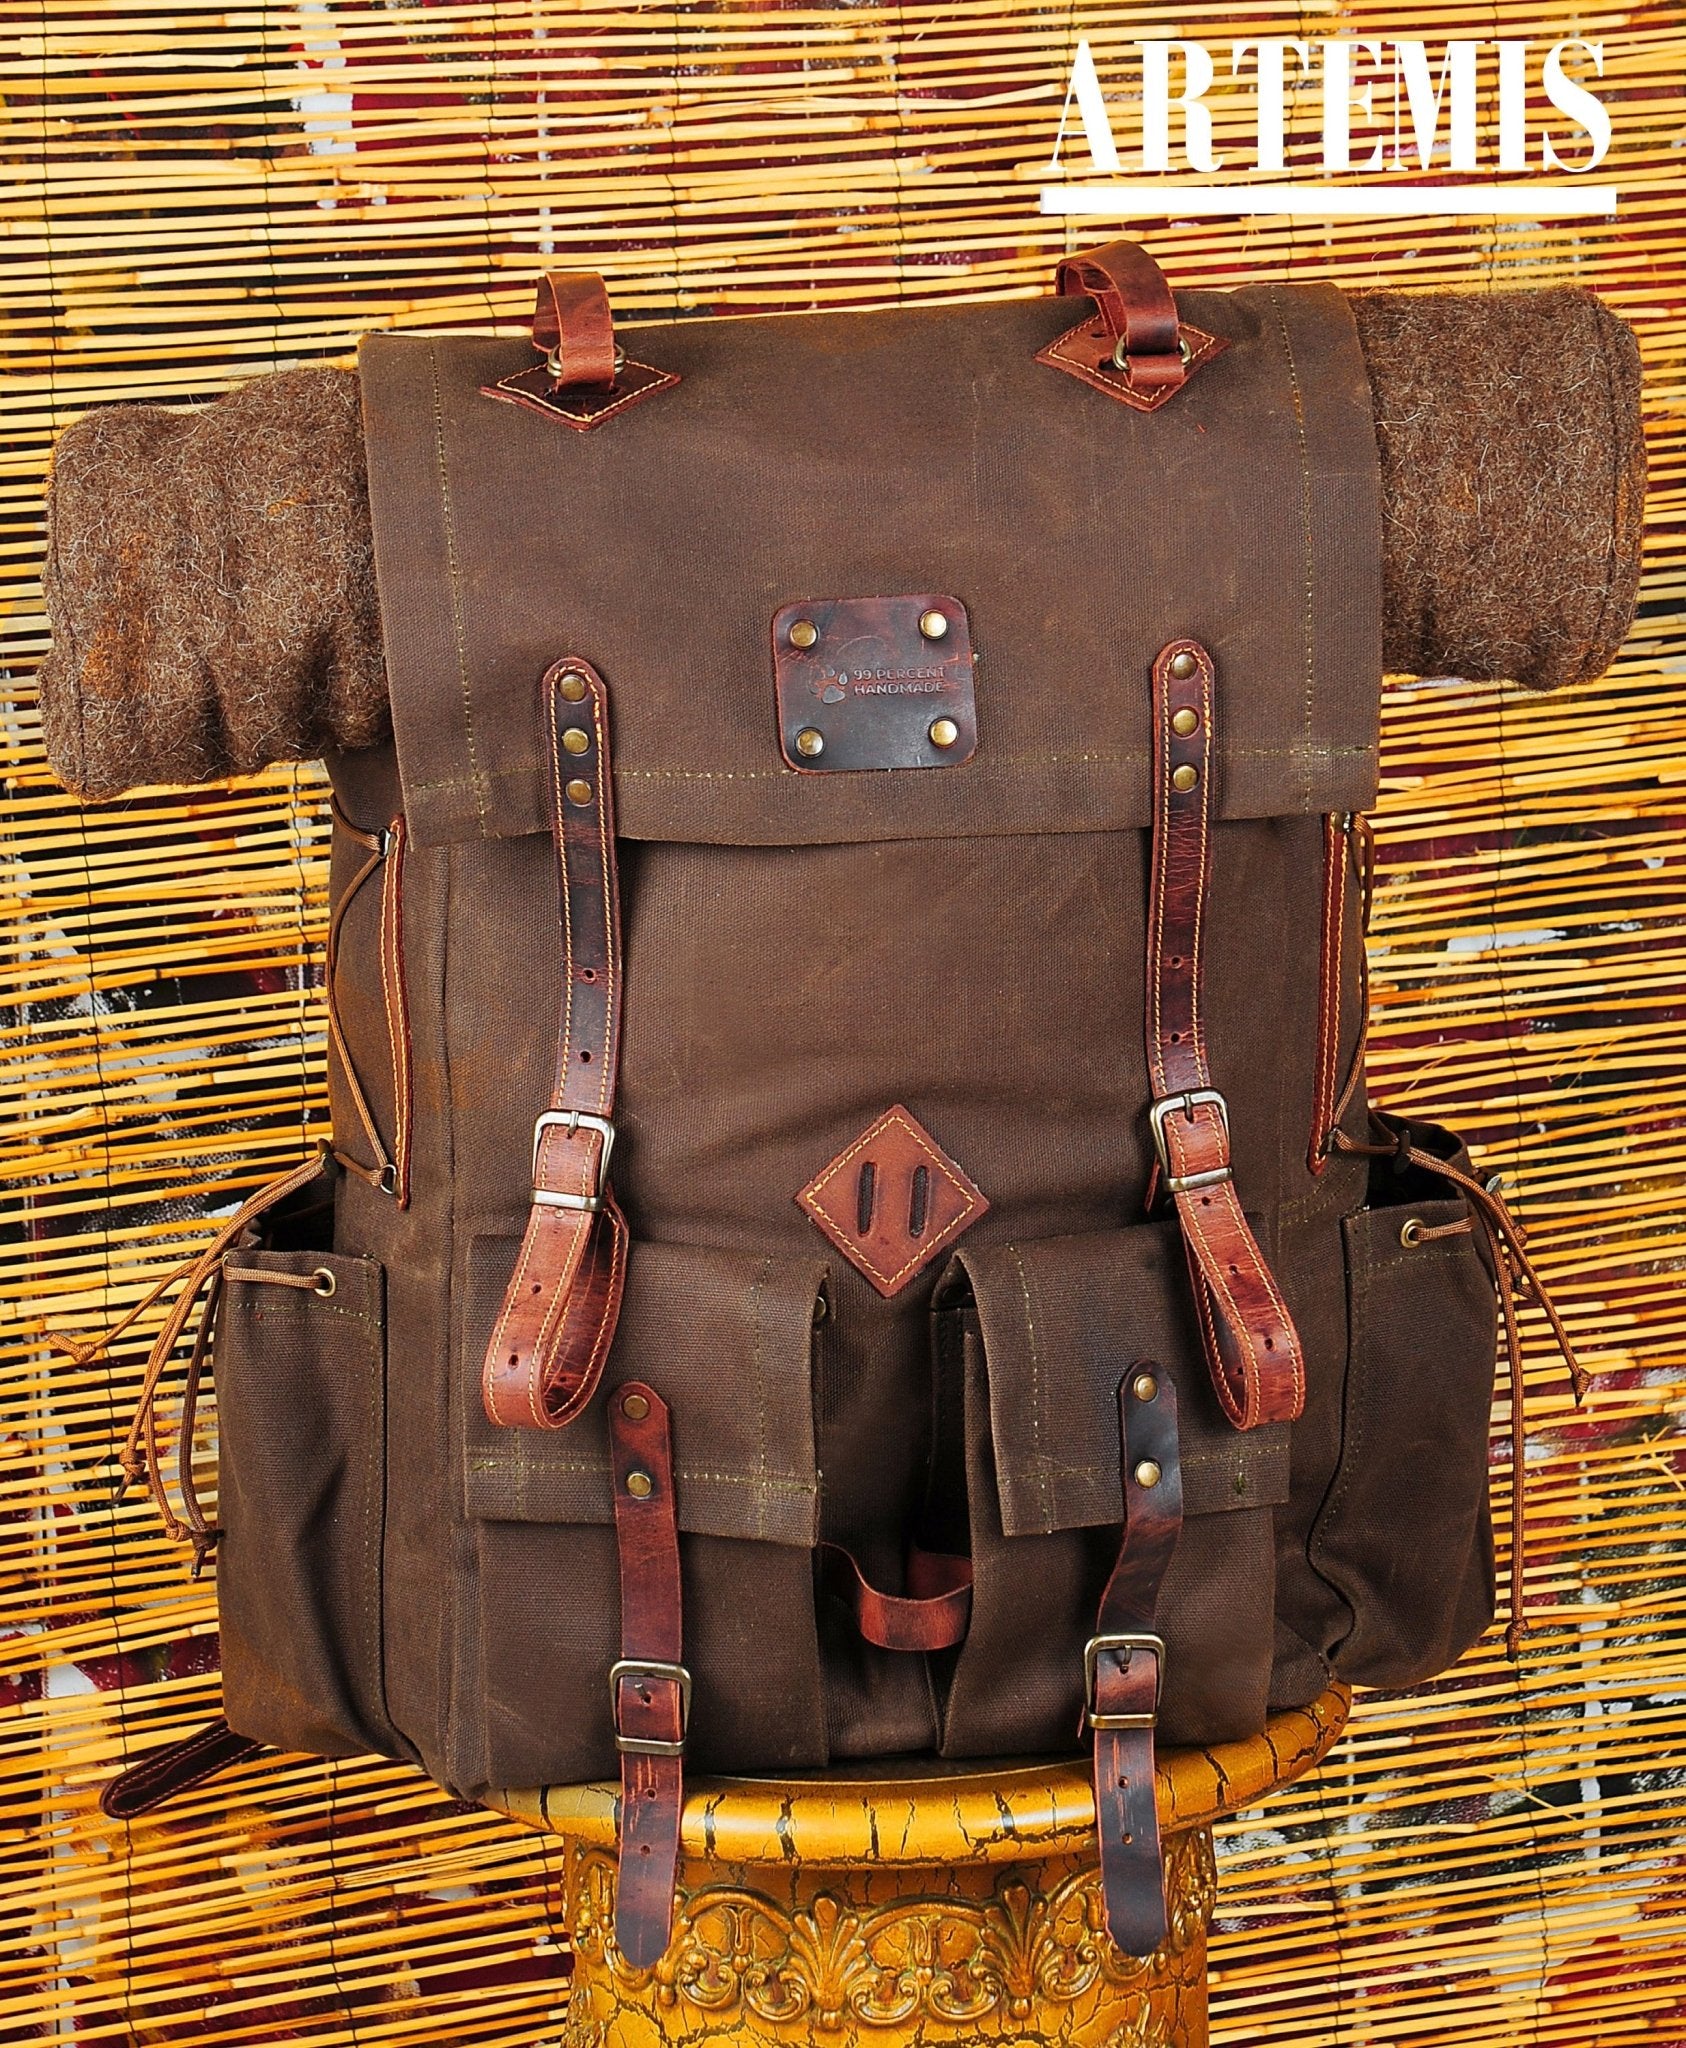 50L | 3 Pieces Left | Green, Brown, Dhaki Colours | Handmade Leather, Waxed Canvas Backpack for Travel, Camping, Bushcraft | Personalization bushcraft - camping - hiking backpack 99percenthandmade Brown 30 Liters 